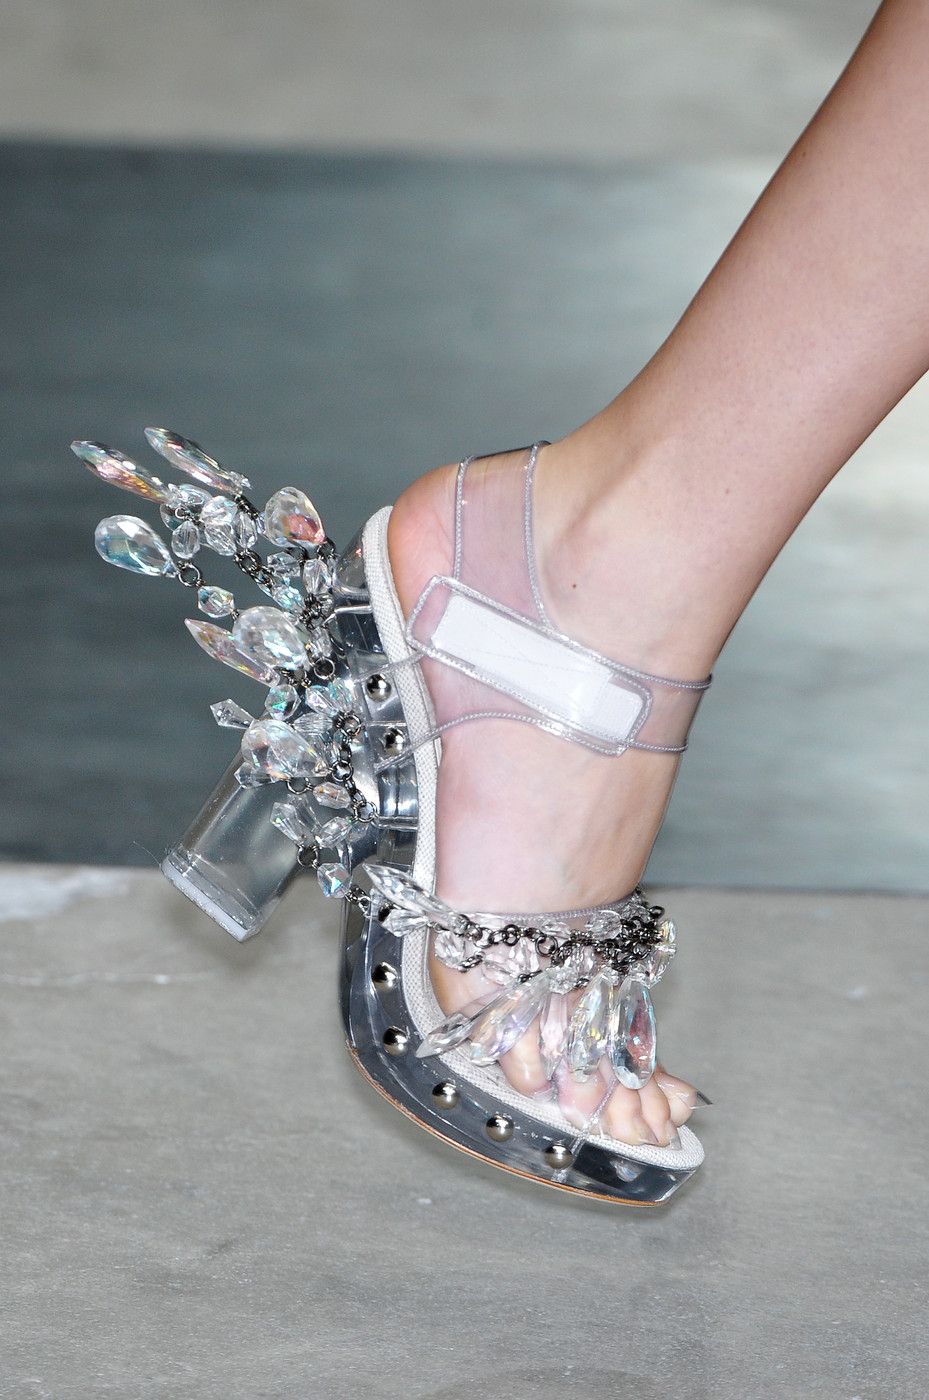 Chandelier Shoes from Spring 2010 